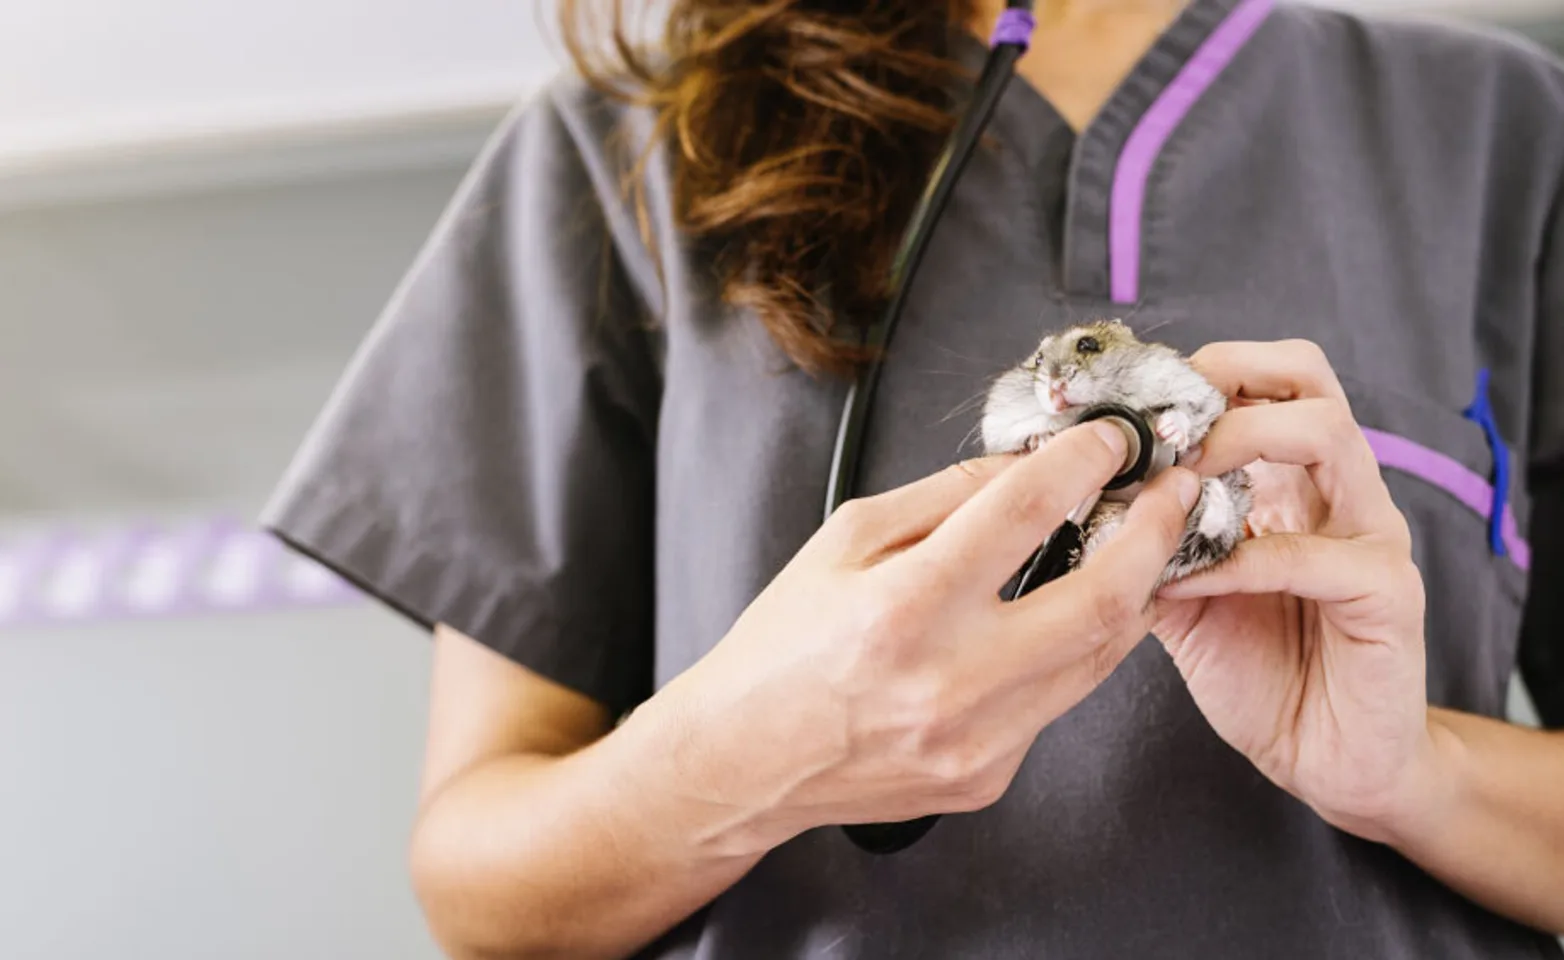 Veterinary staff holding a hamster